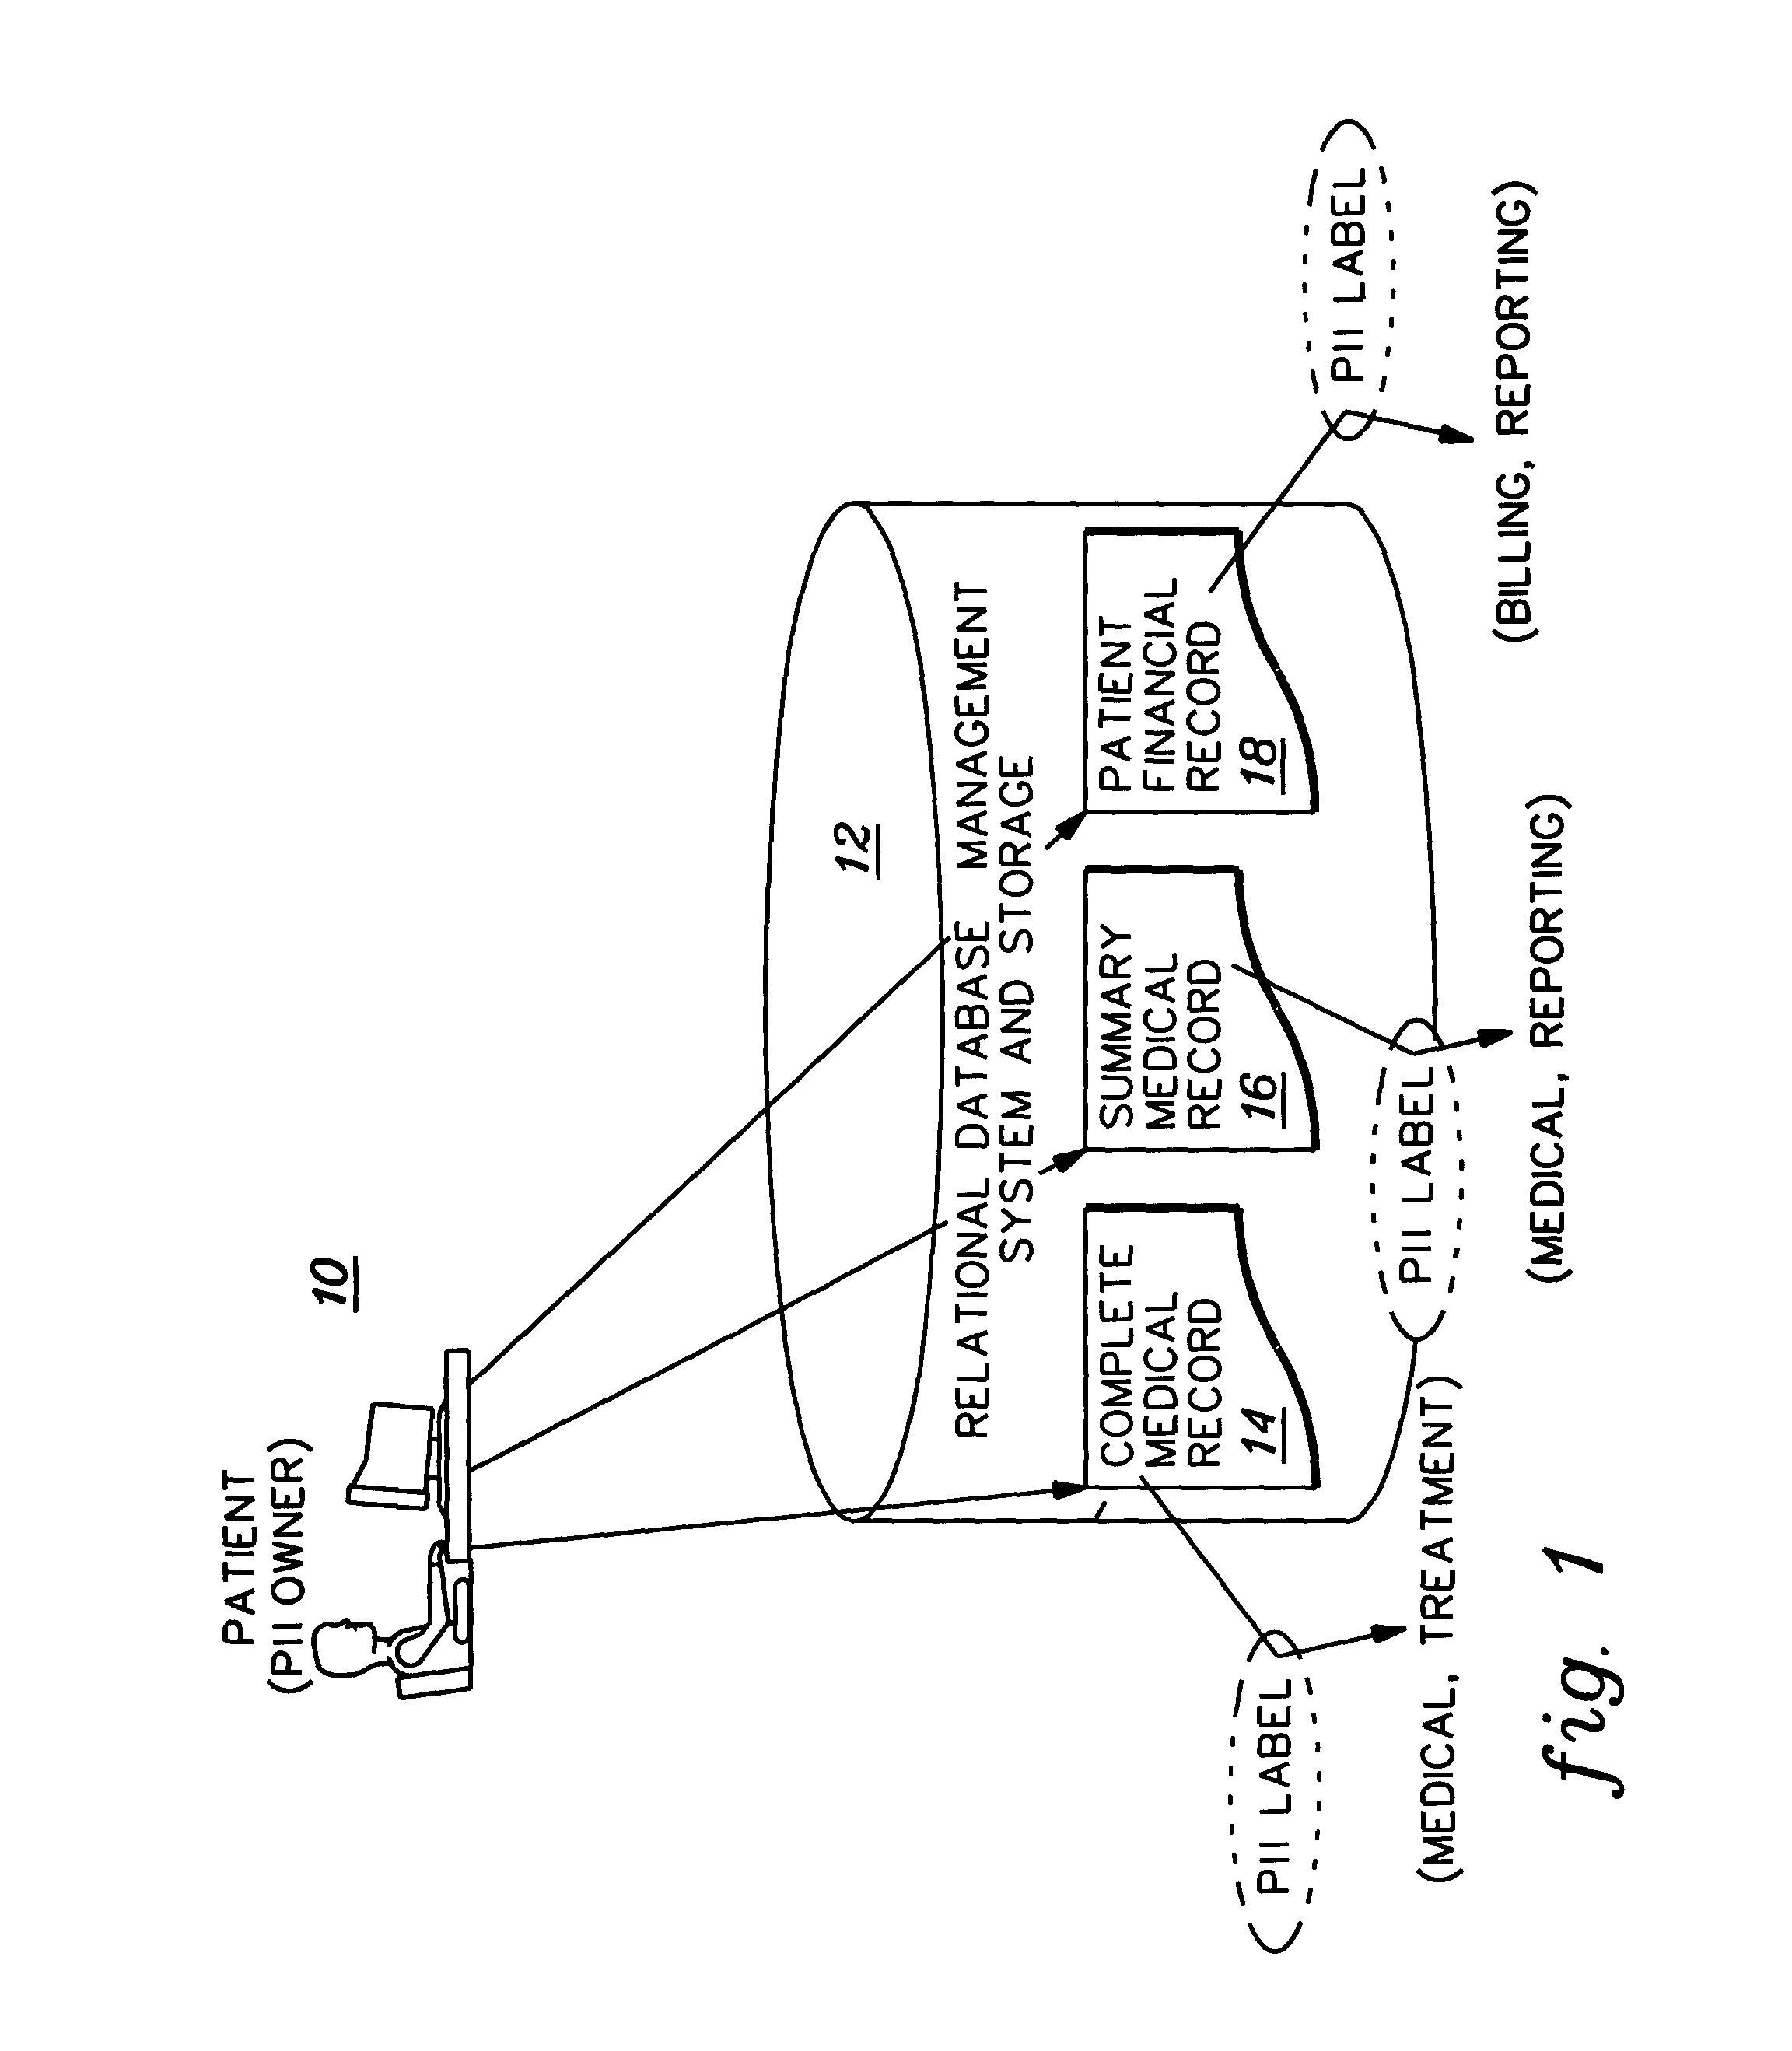 Implementation and use of a PII data access control facility employing personally identifying information labels and purpose serving functions sets